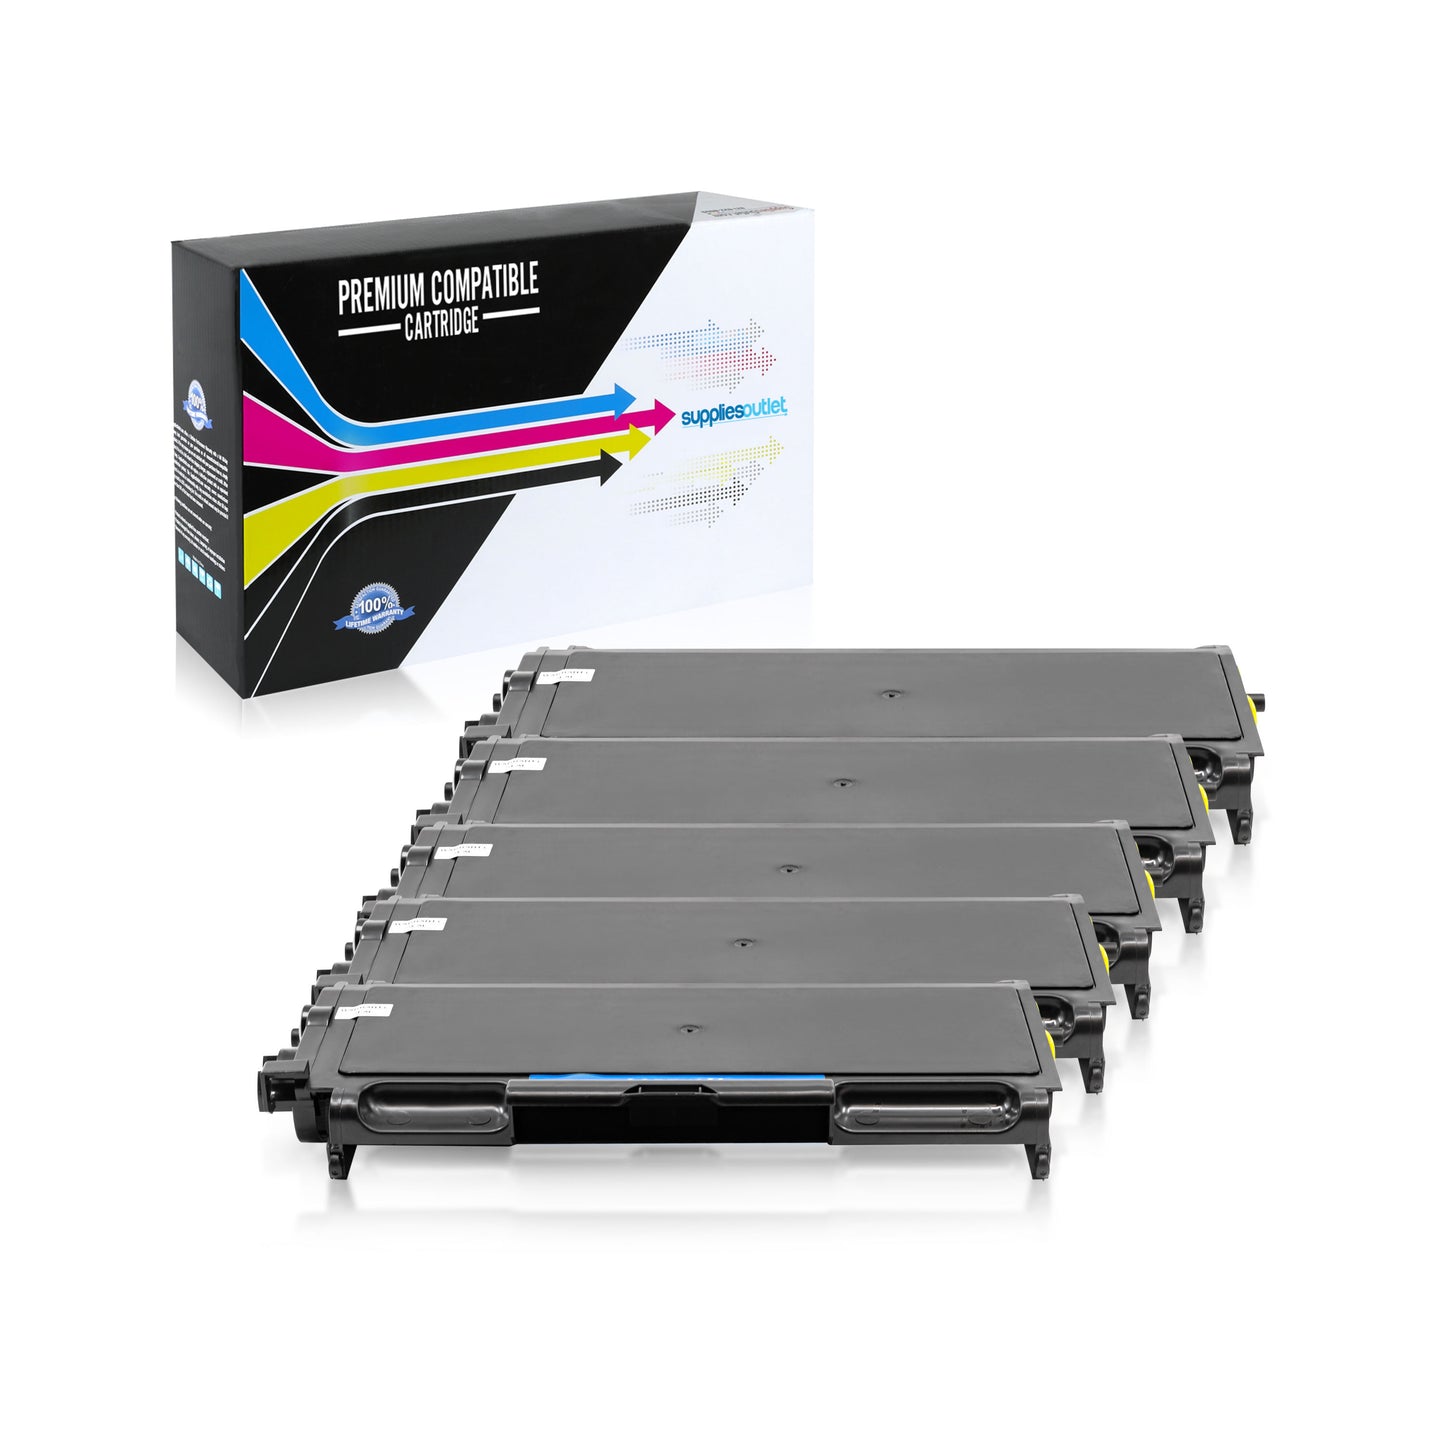 Compatible Brother TN360 Black Toner Cartridge - 2,600 Page Yield